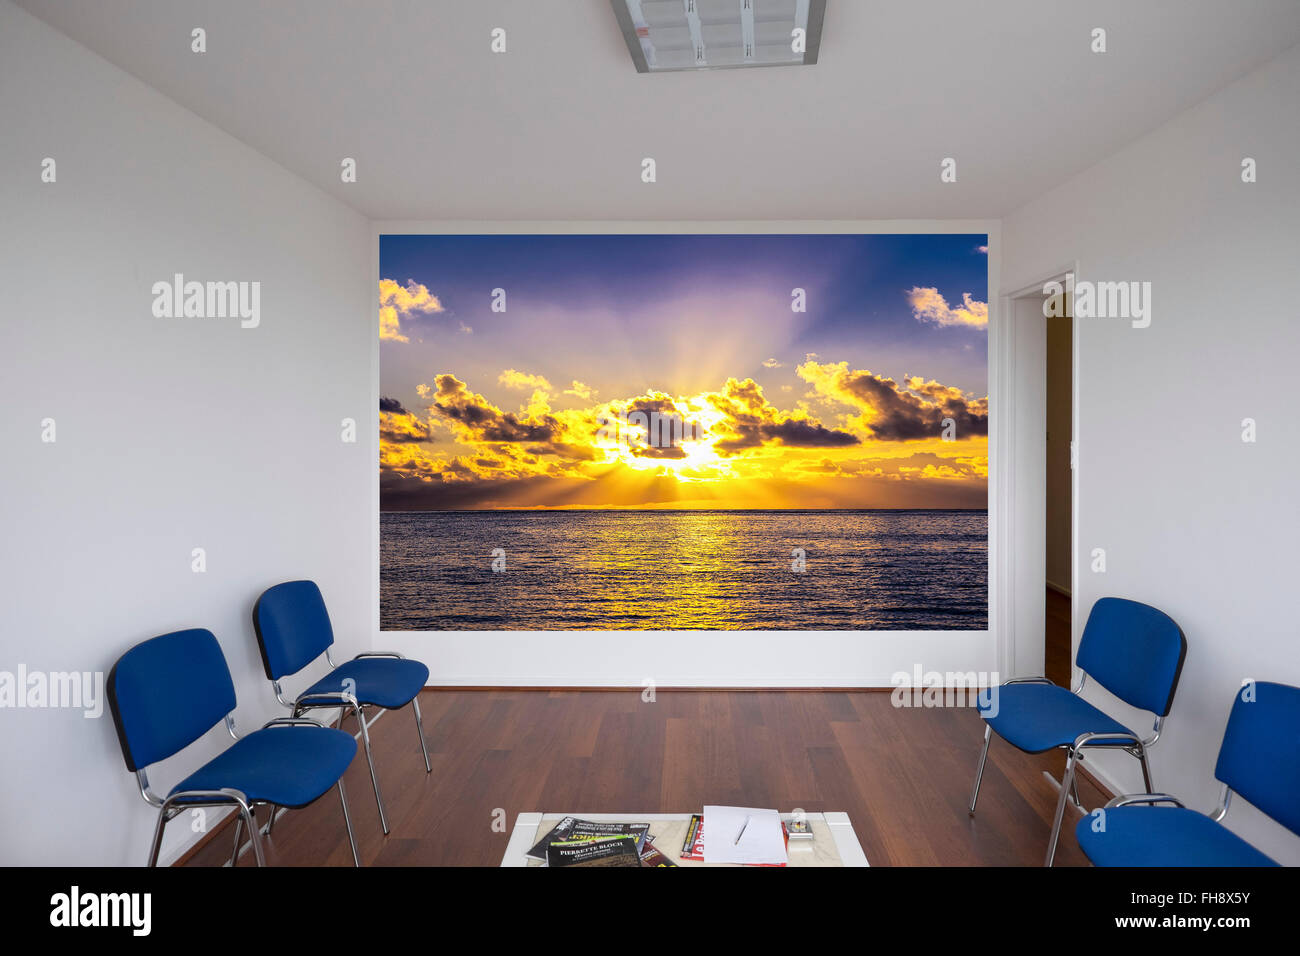 Empty doctor waiting room with blue chairs and sunset poster, France, Europe Stock Photo